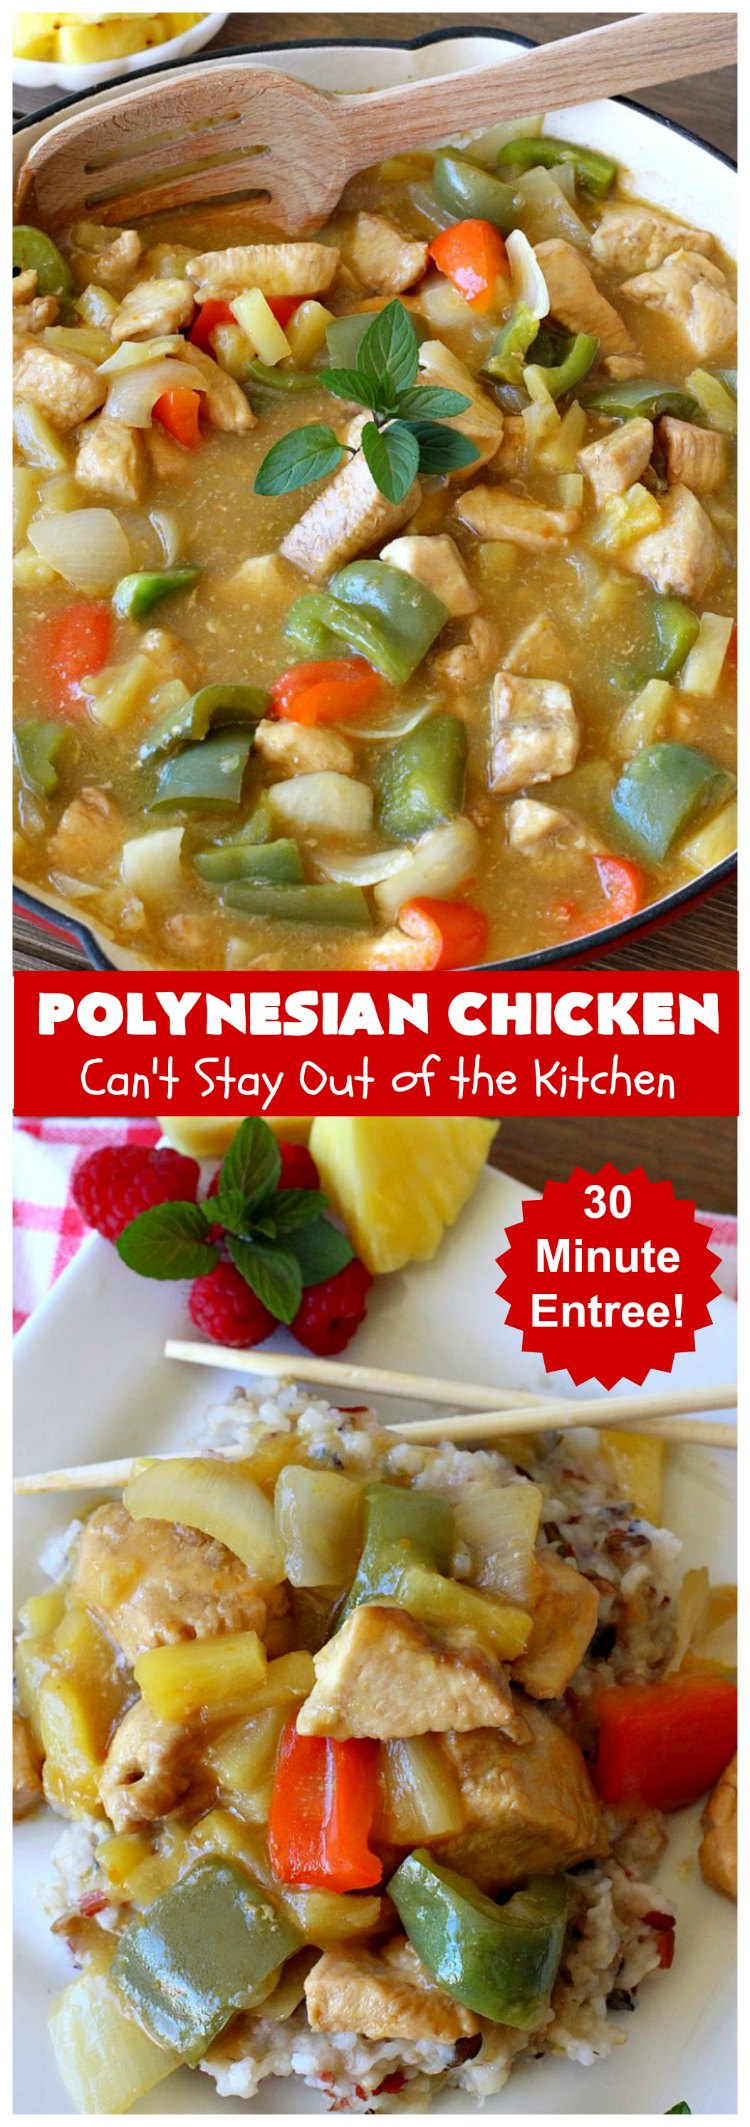 Polynesian Chicken | Can't Stay Out of the Kitchen | this quick & easy 30-minute entree is perfect for weeknight dinners when you're short on time. It's got amazing #Polynesian flavors with #pineapple & a #Caribbean sauce added to the ingredients. #GlutenFree #chicken #PolynesianChicken #30MinuteMeal